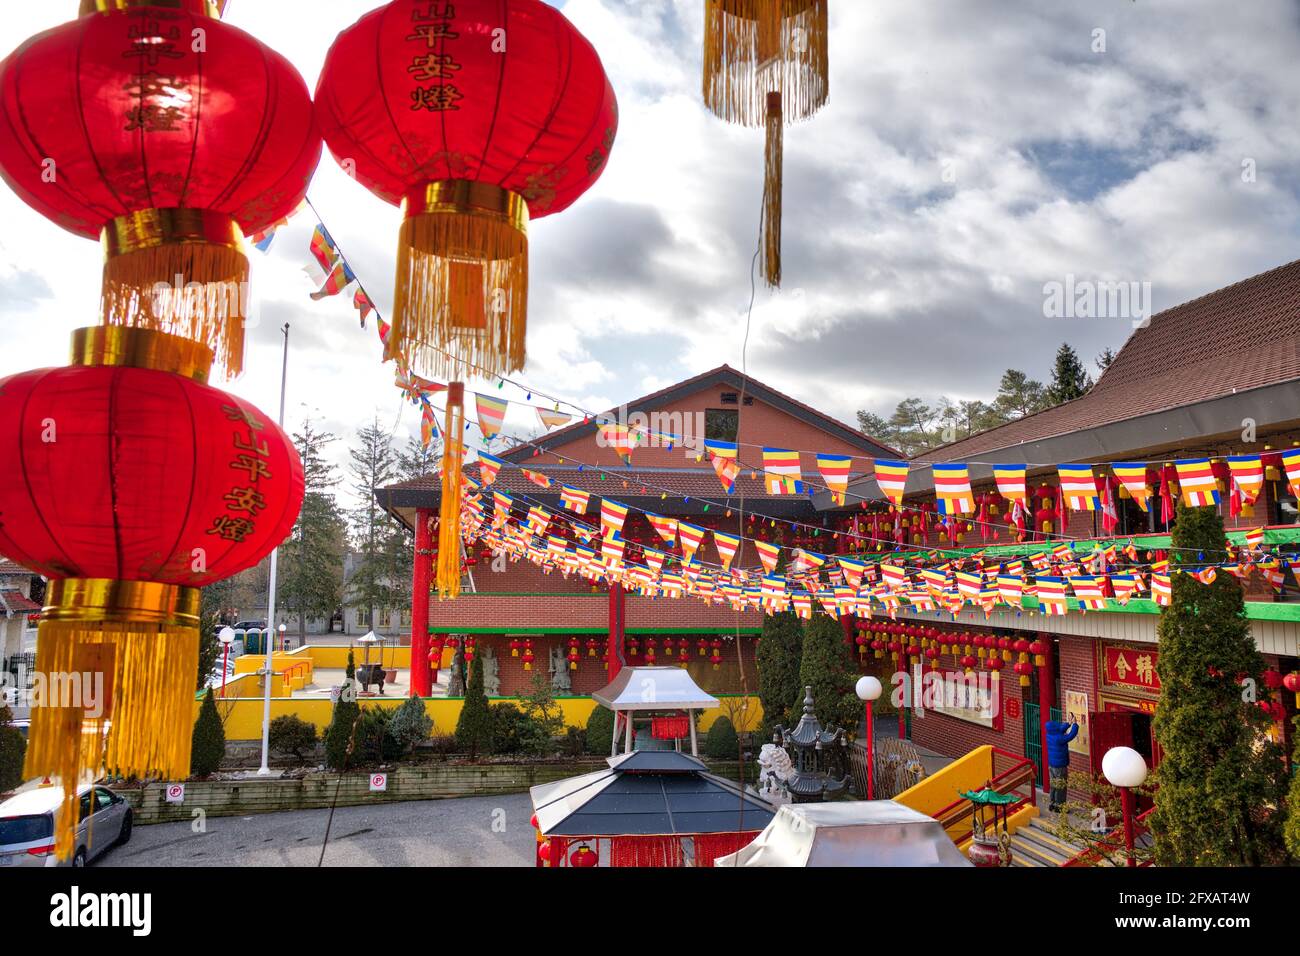 Decoration with Chinese Lantern for Chines New Year in a Buddhist temple Stock Photo